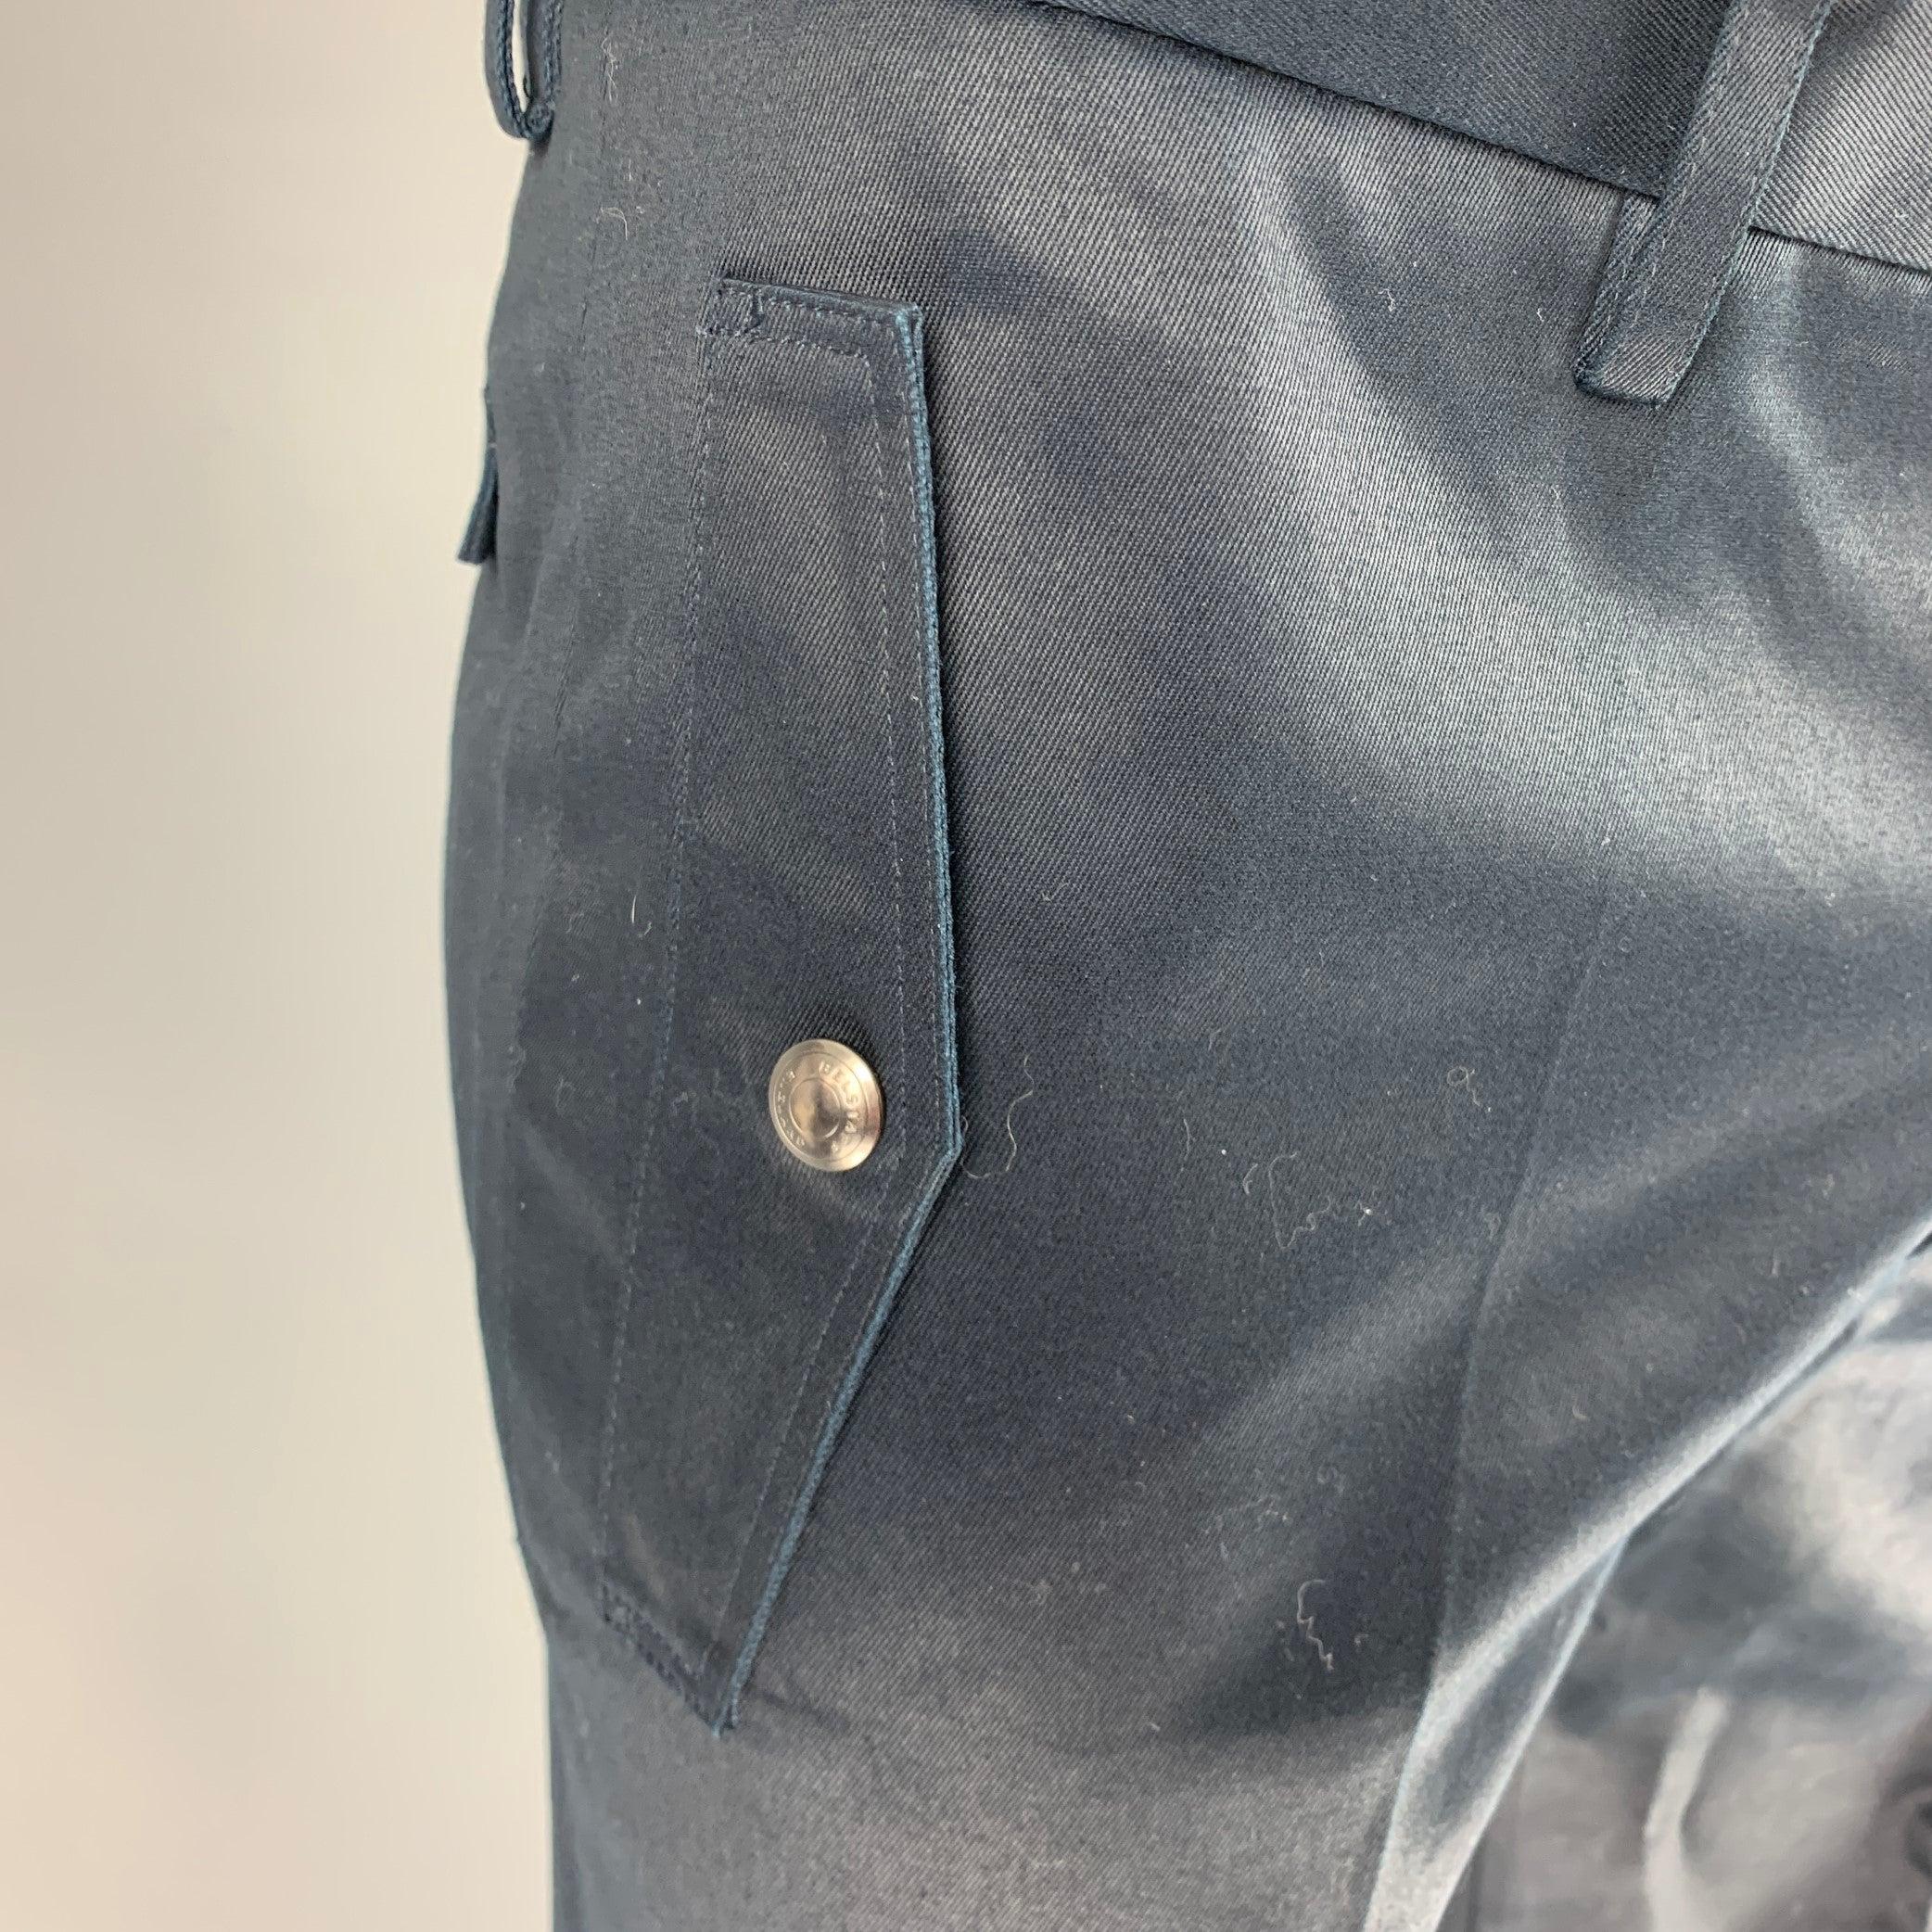 BELSTAFF dress pants
in a black cotton twill featuring four flap pockets and zip fly closure. Made in Italy.Very Good Pre-Owned Condition. Minor signs of wear. 

Marked:   34 

Measurements: 
  Waist: 34 inches Rise: 8 inches Inseam: 34 inches Leg